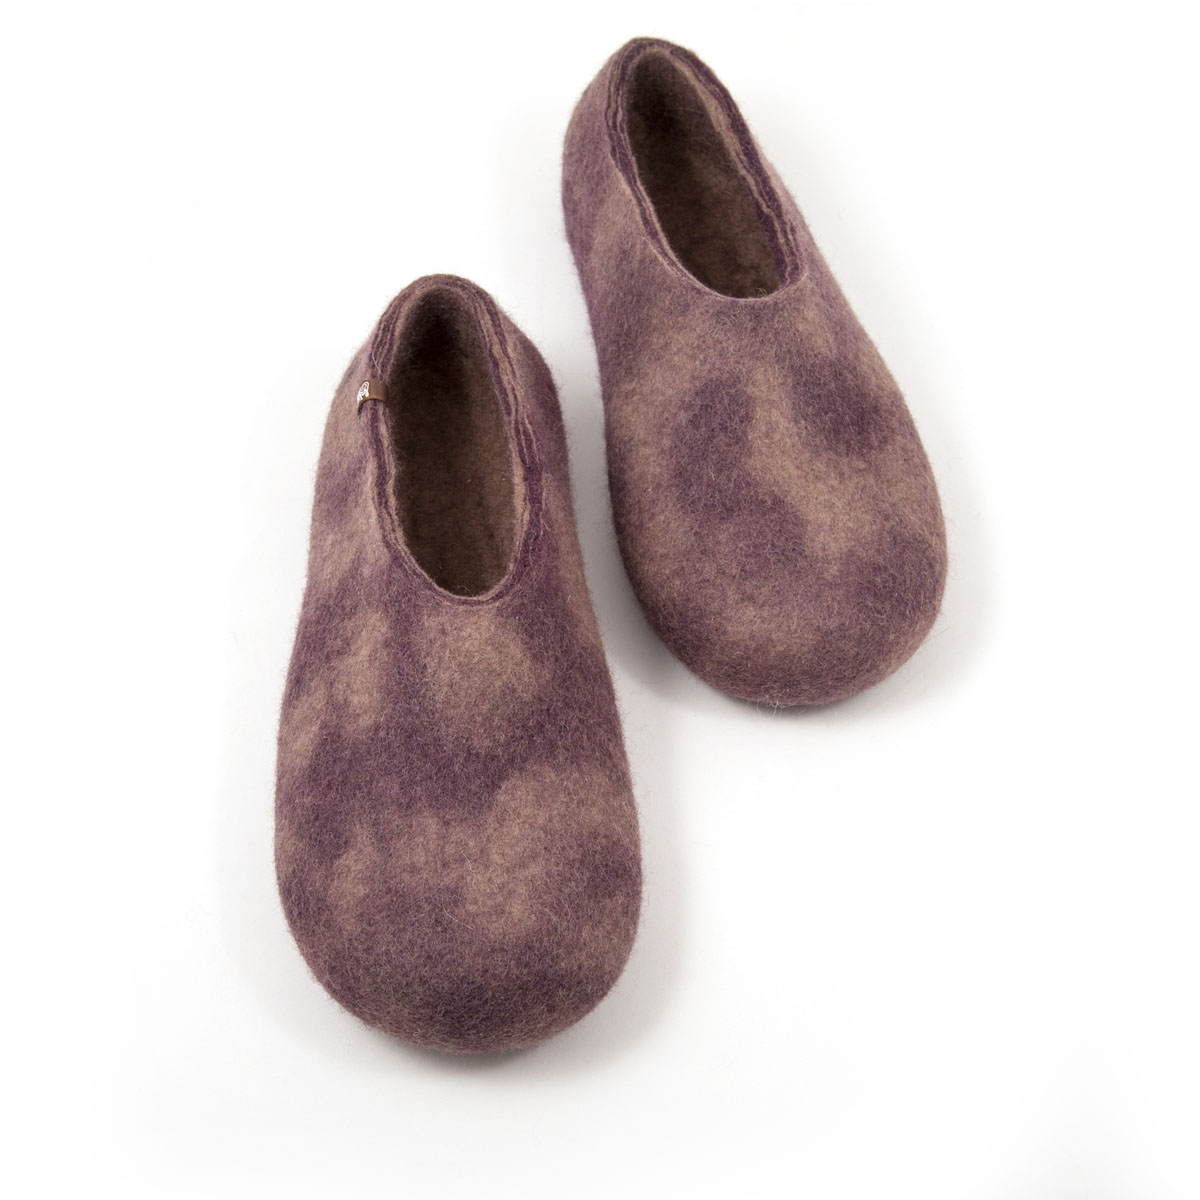 From our project with DHGshop this is a camouflage style Wooppers pair in purple and ash